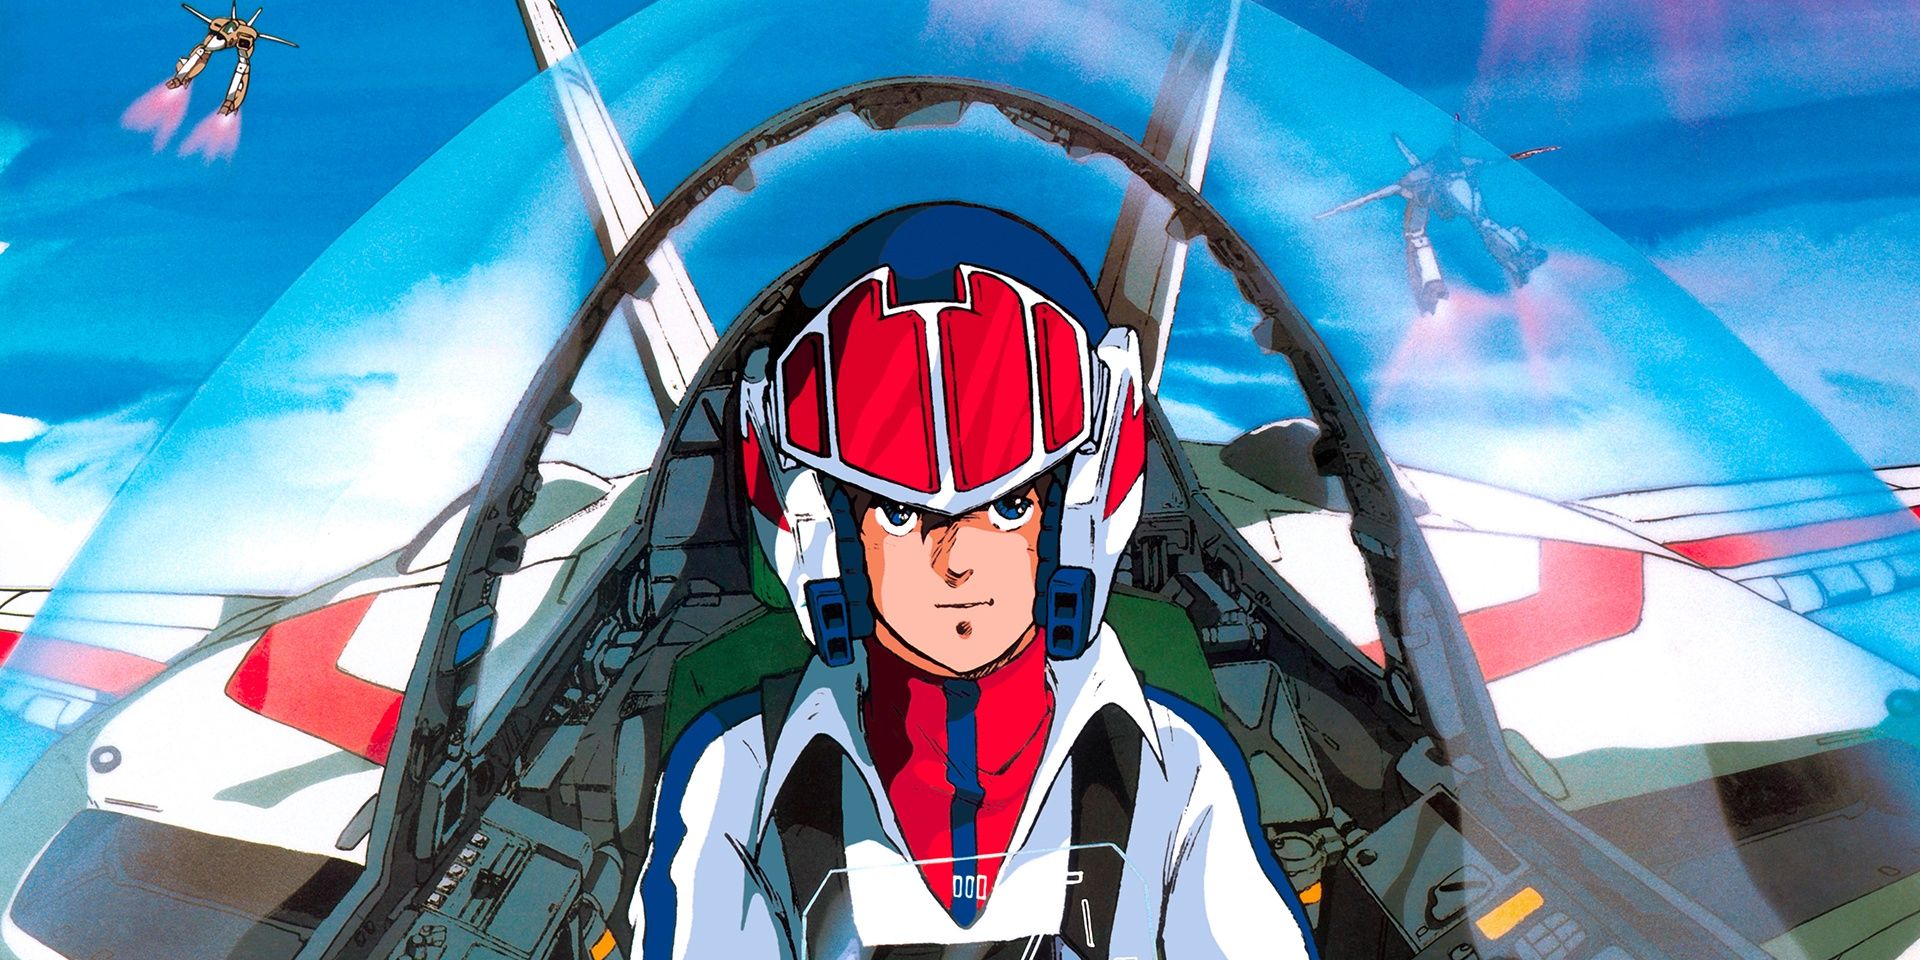 An image from Super Dimension Fortress Macross.